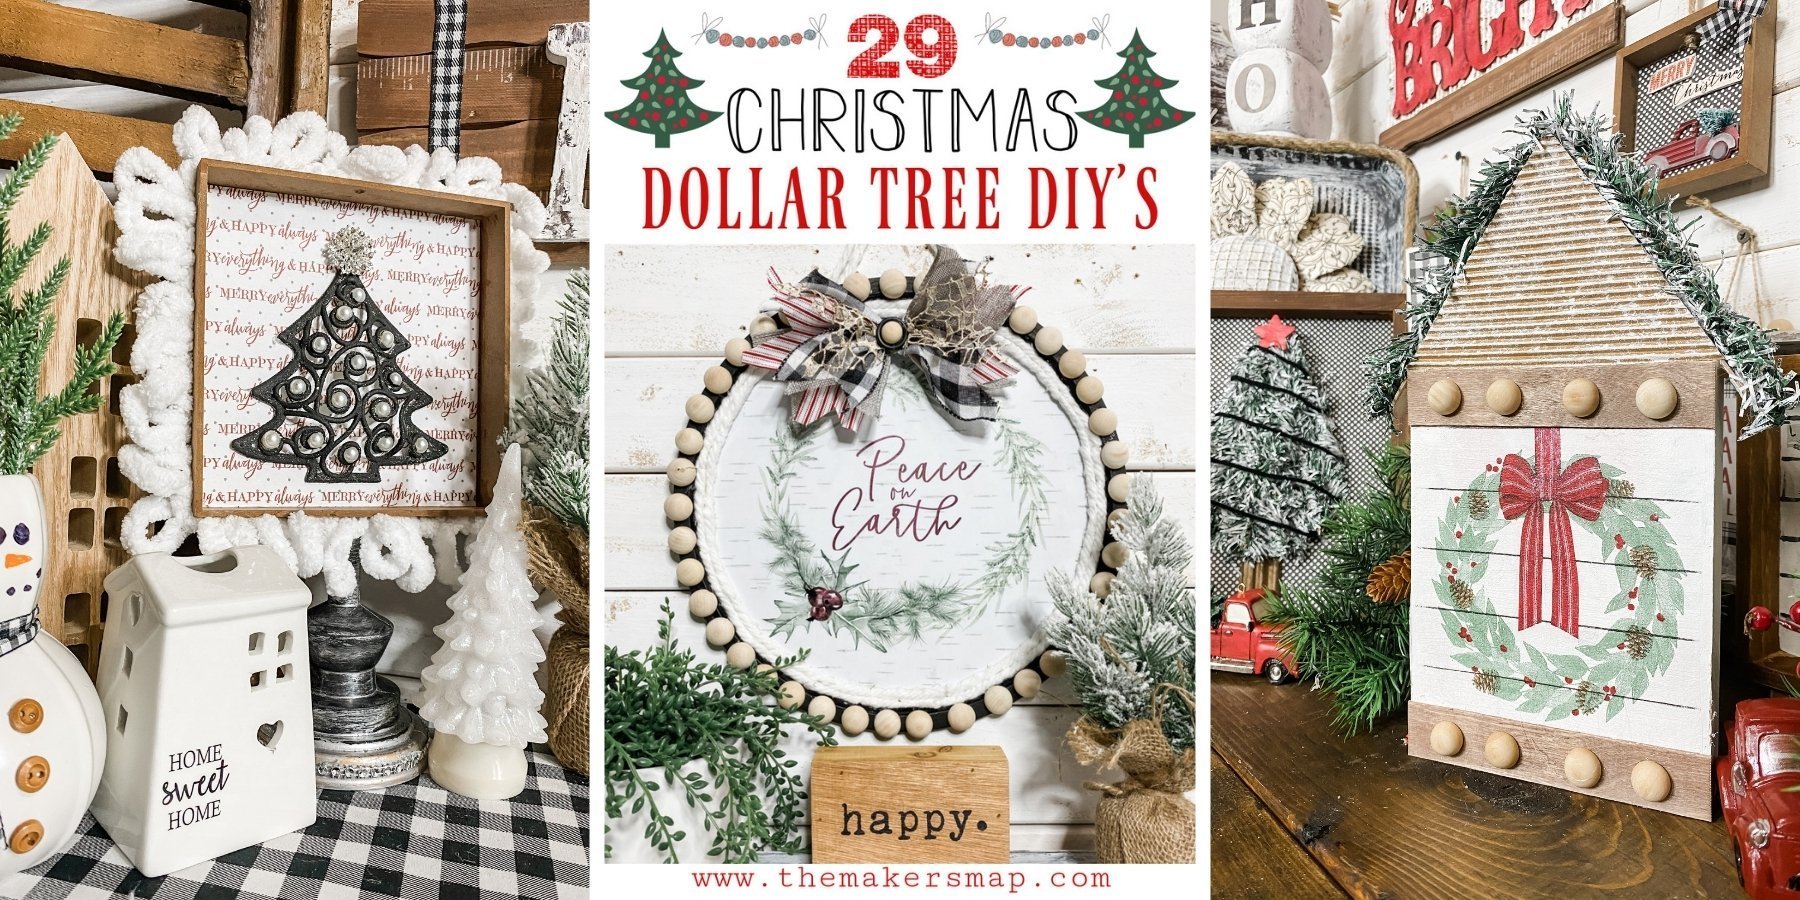 29 Amazing Christmas Indoor Decorations Ideas for This Year!